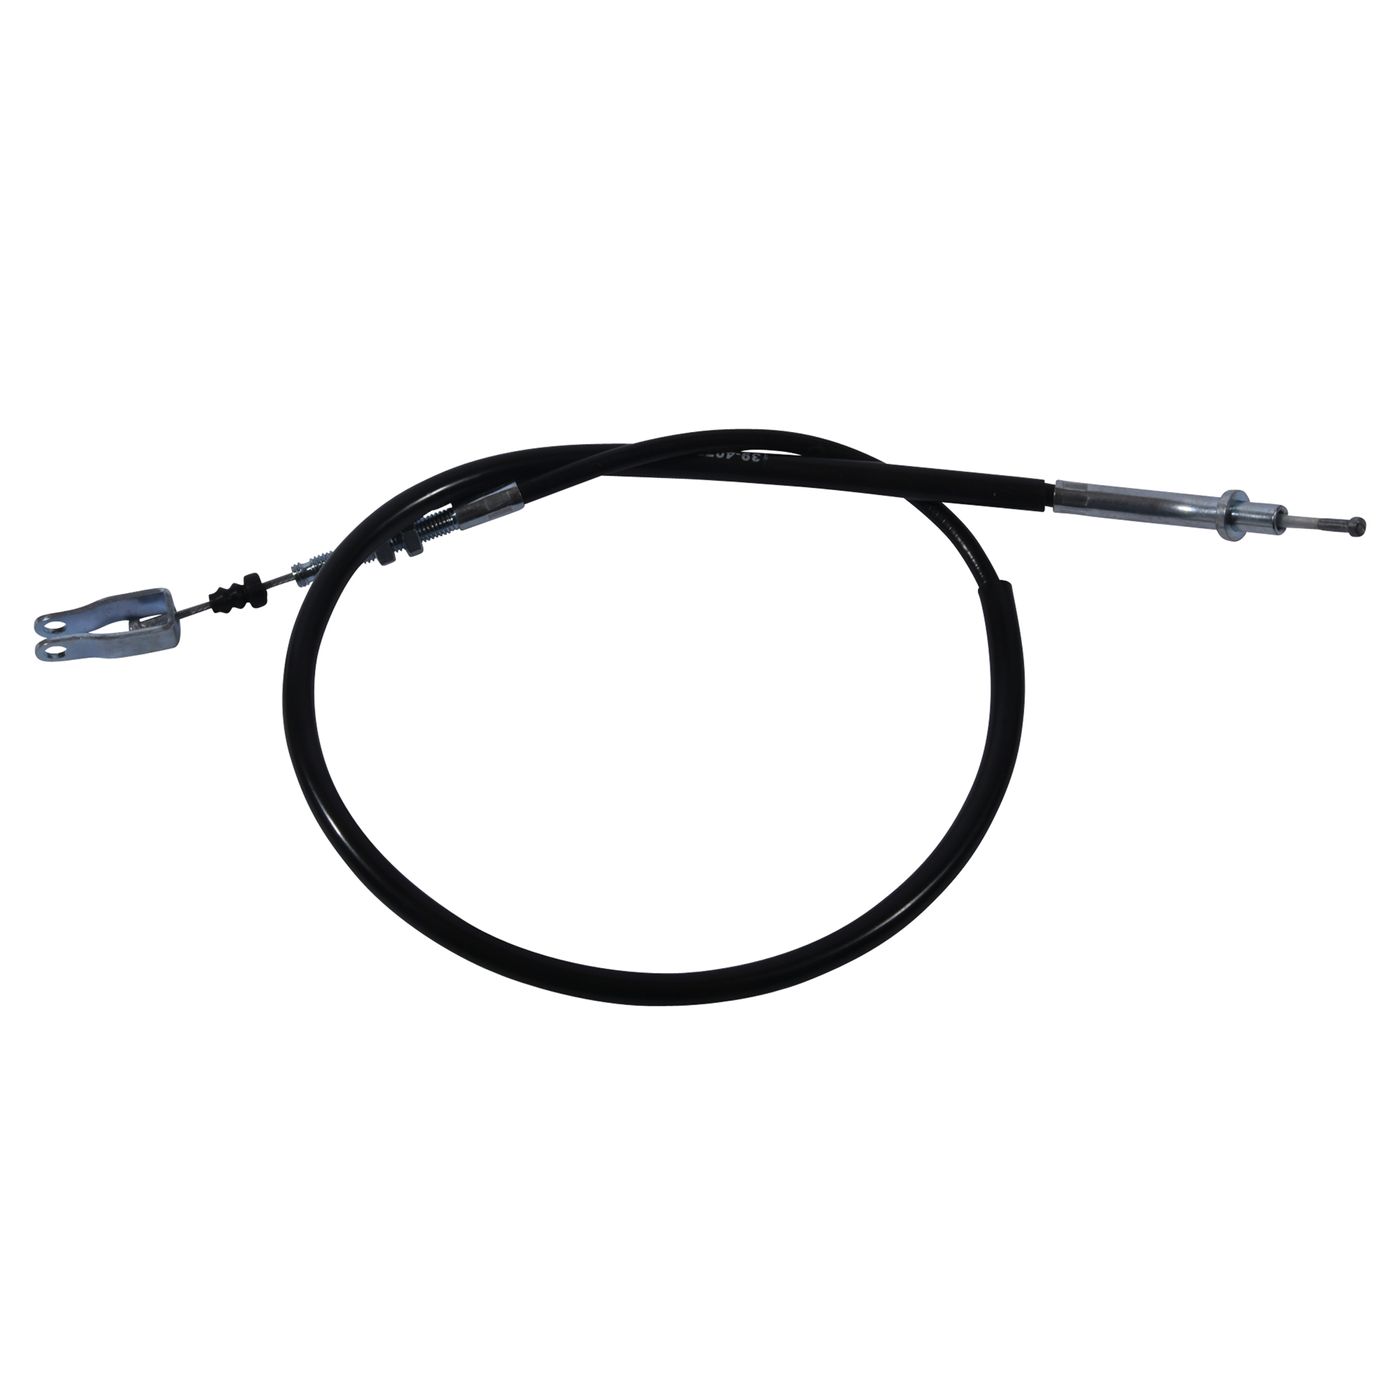 Wrp Brake Cables - WRP454068 image